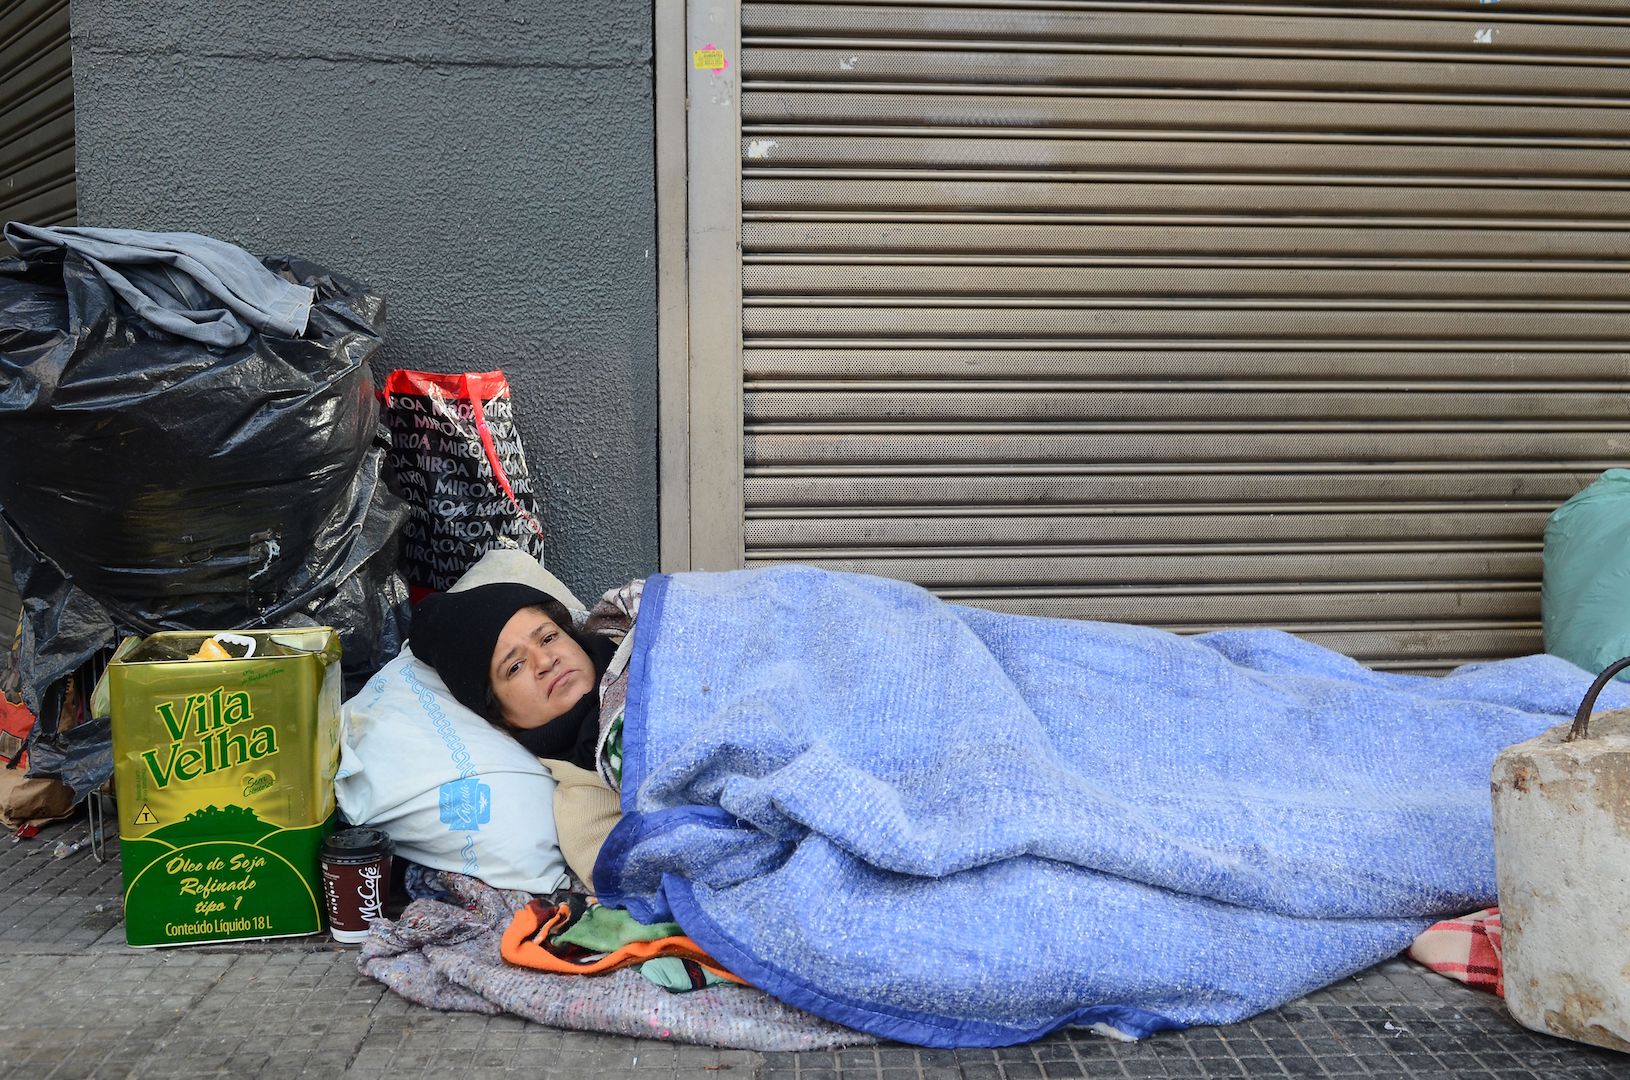 Brazil,With temperatures dipping to the single digits, the homeless in Sao Paulo get some help from NGOs